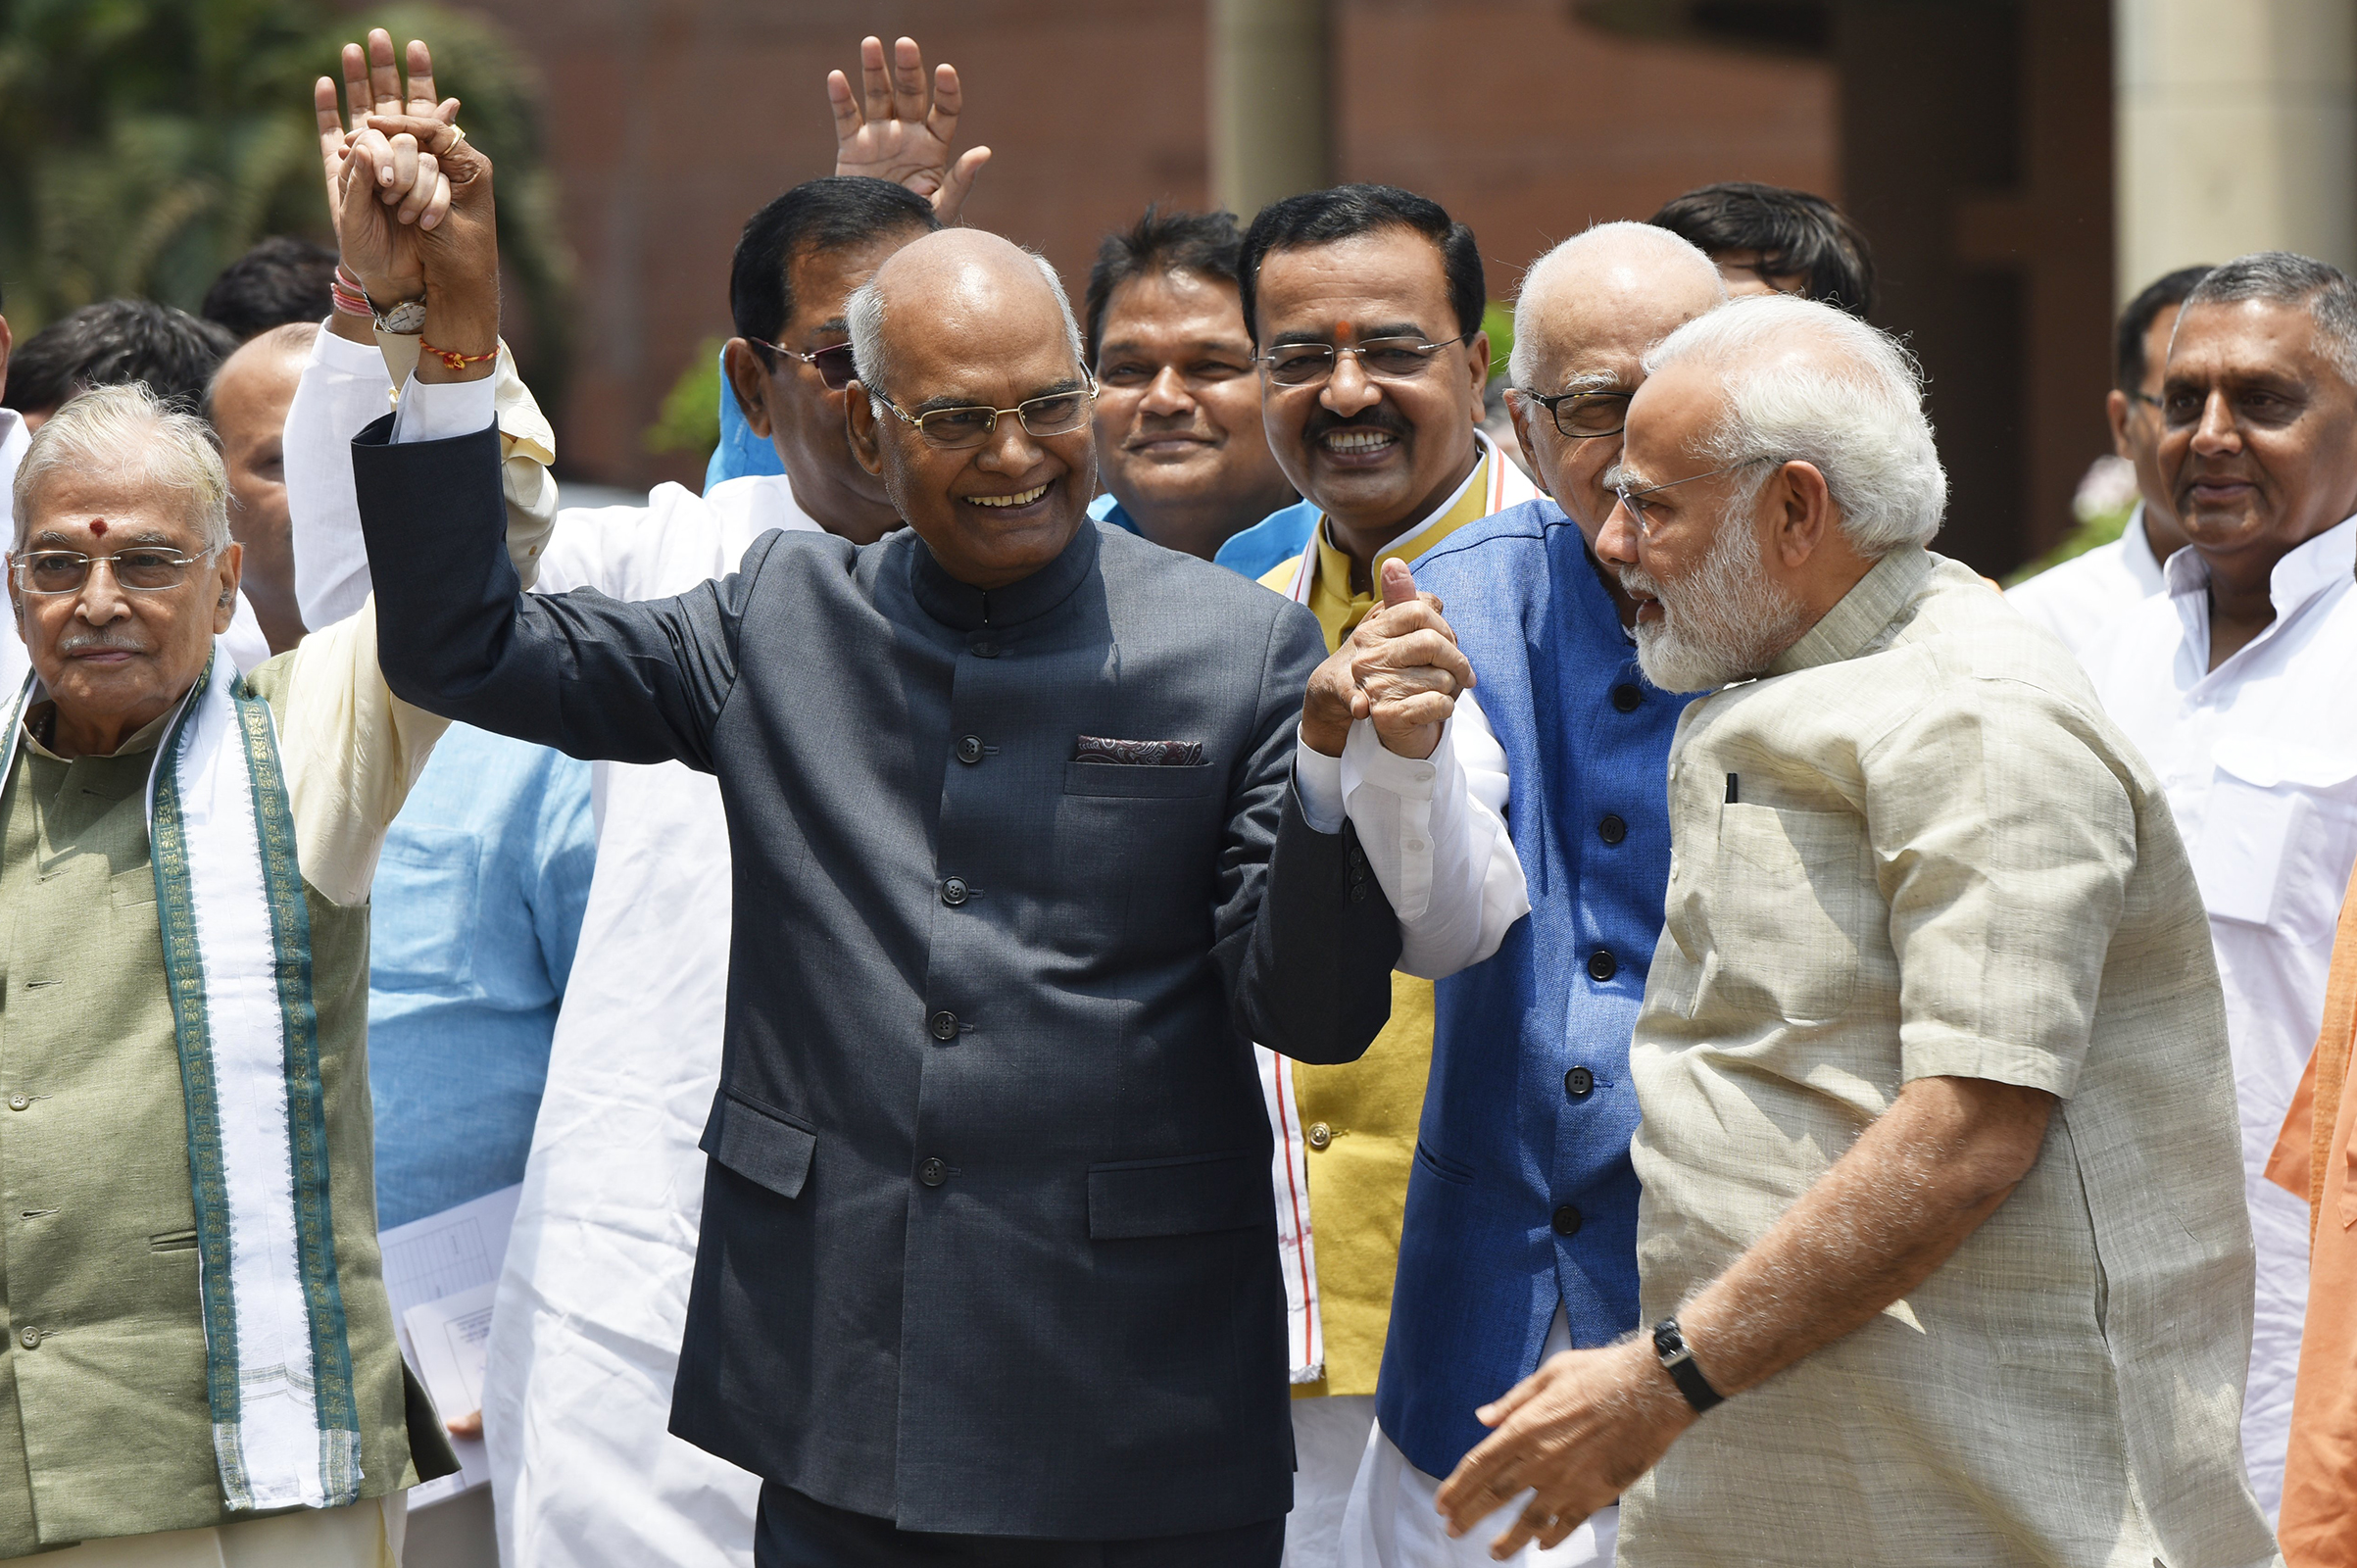 Ram Nath Kovind was due to be named the 14th President of India on July 20 (Vipin Kumar—Hindustan Times/Sipa USA)